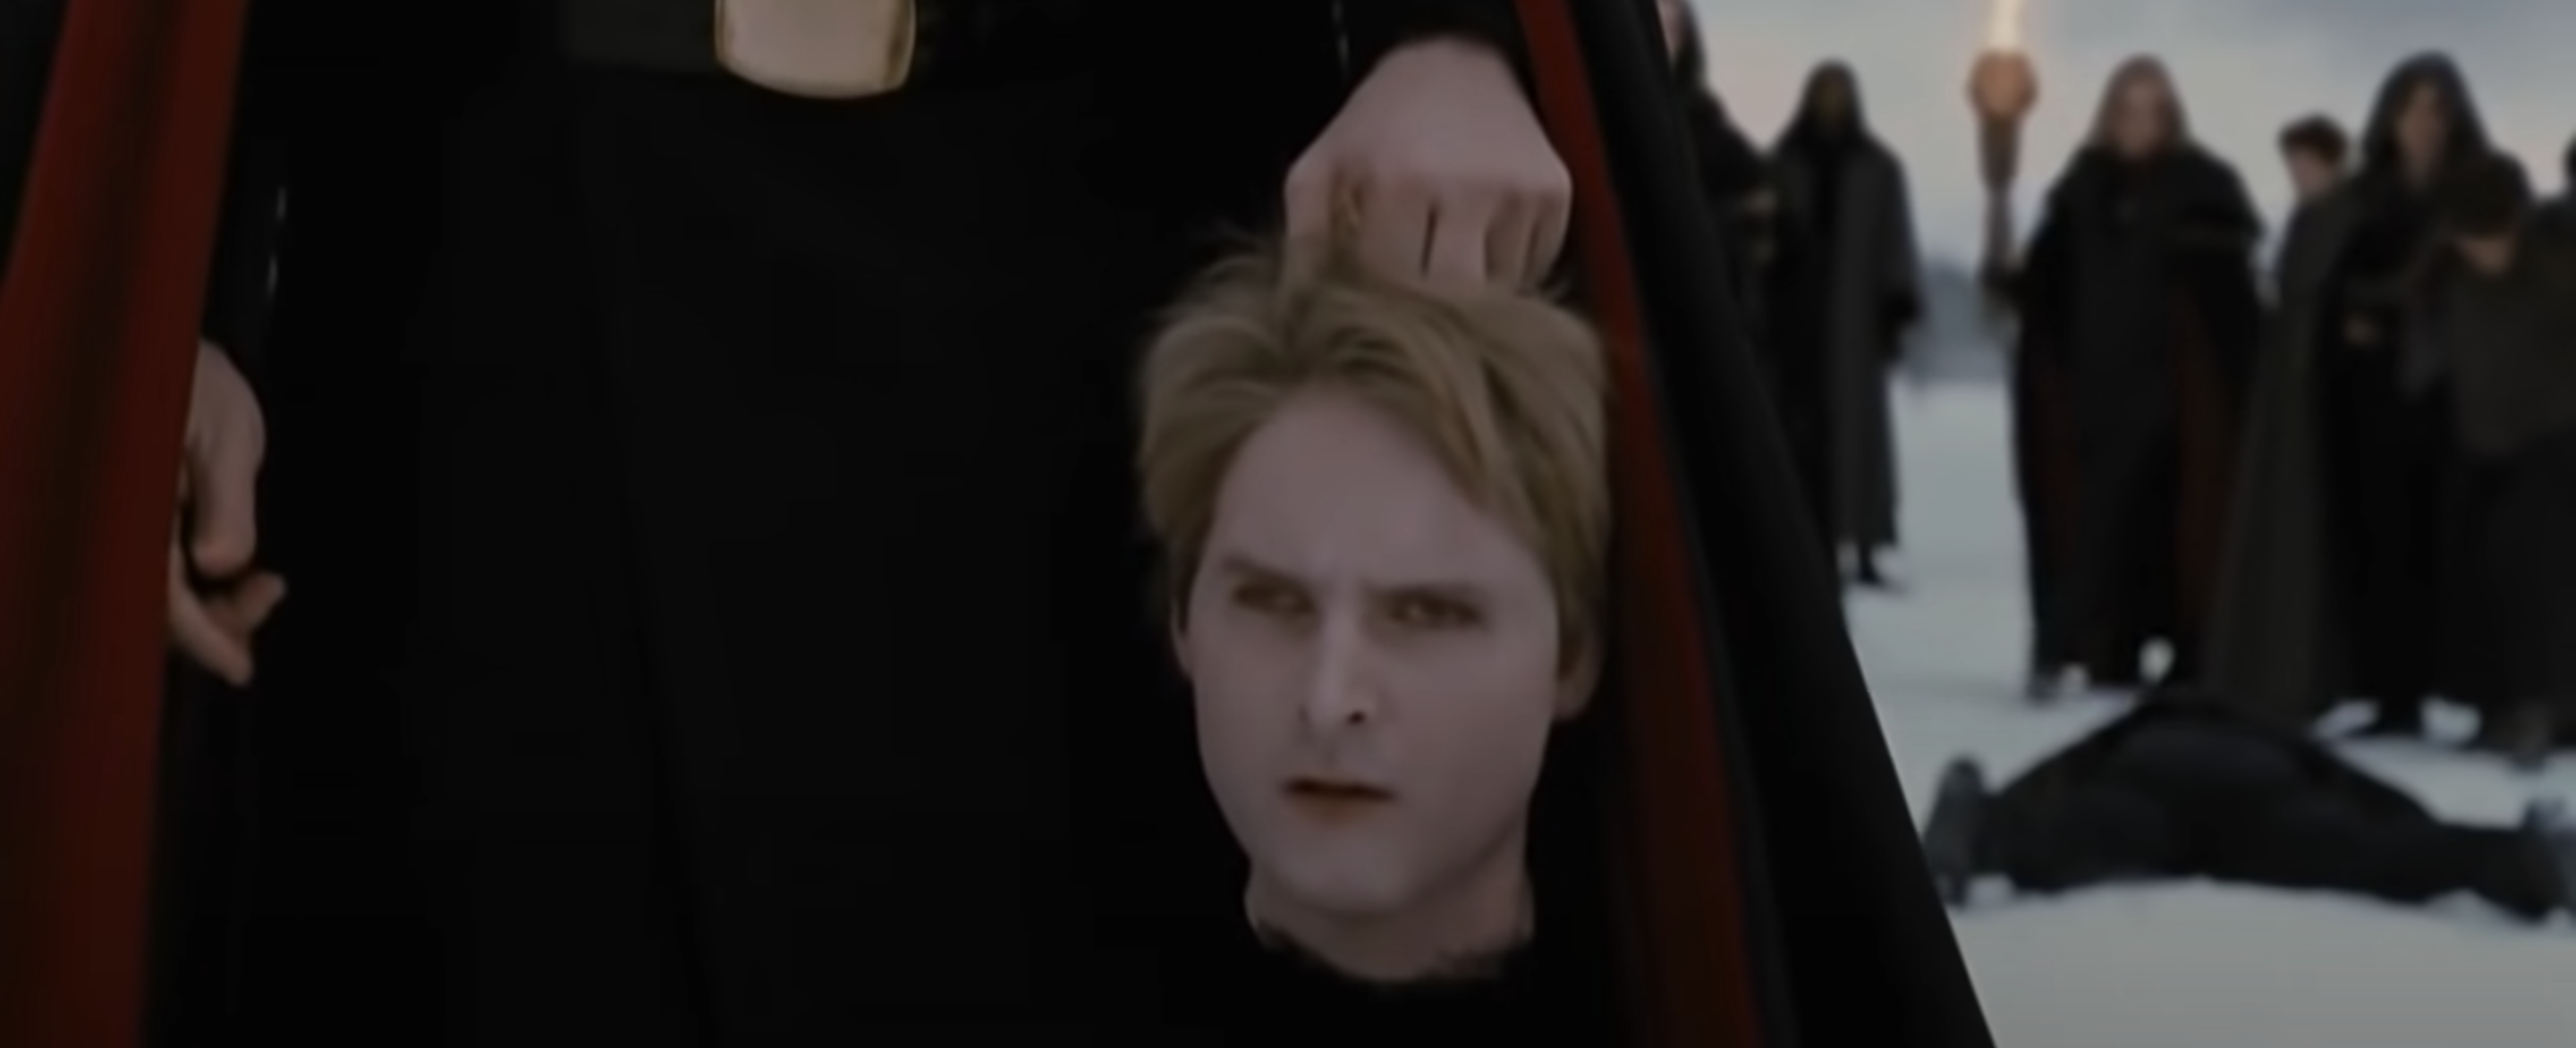 A vampire holds the decapitated head of another vampire